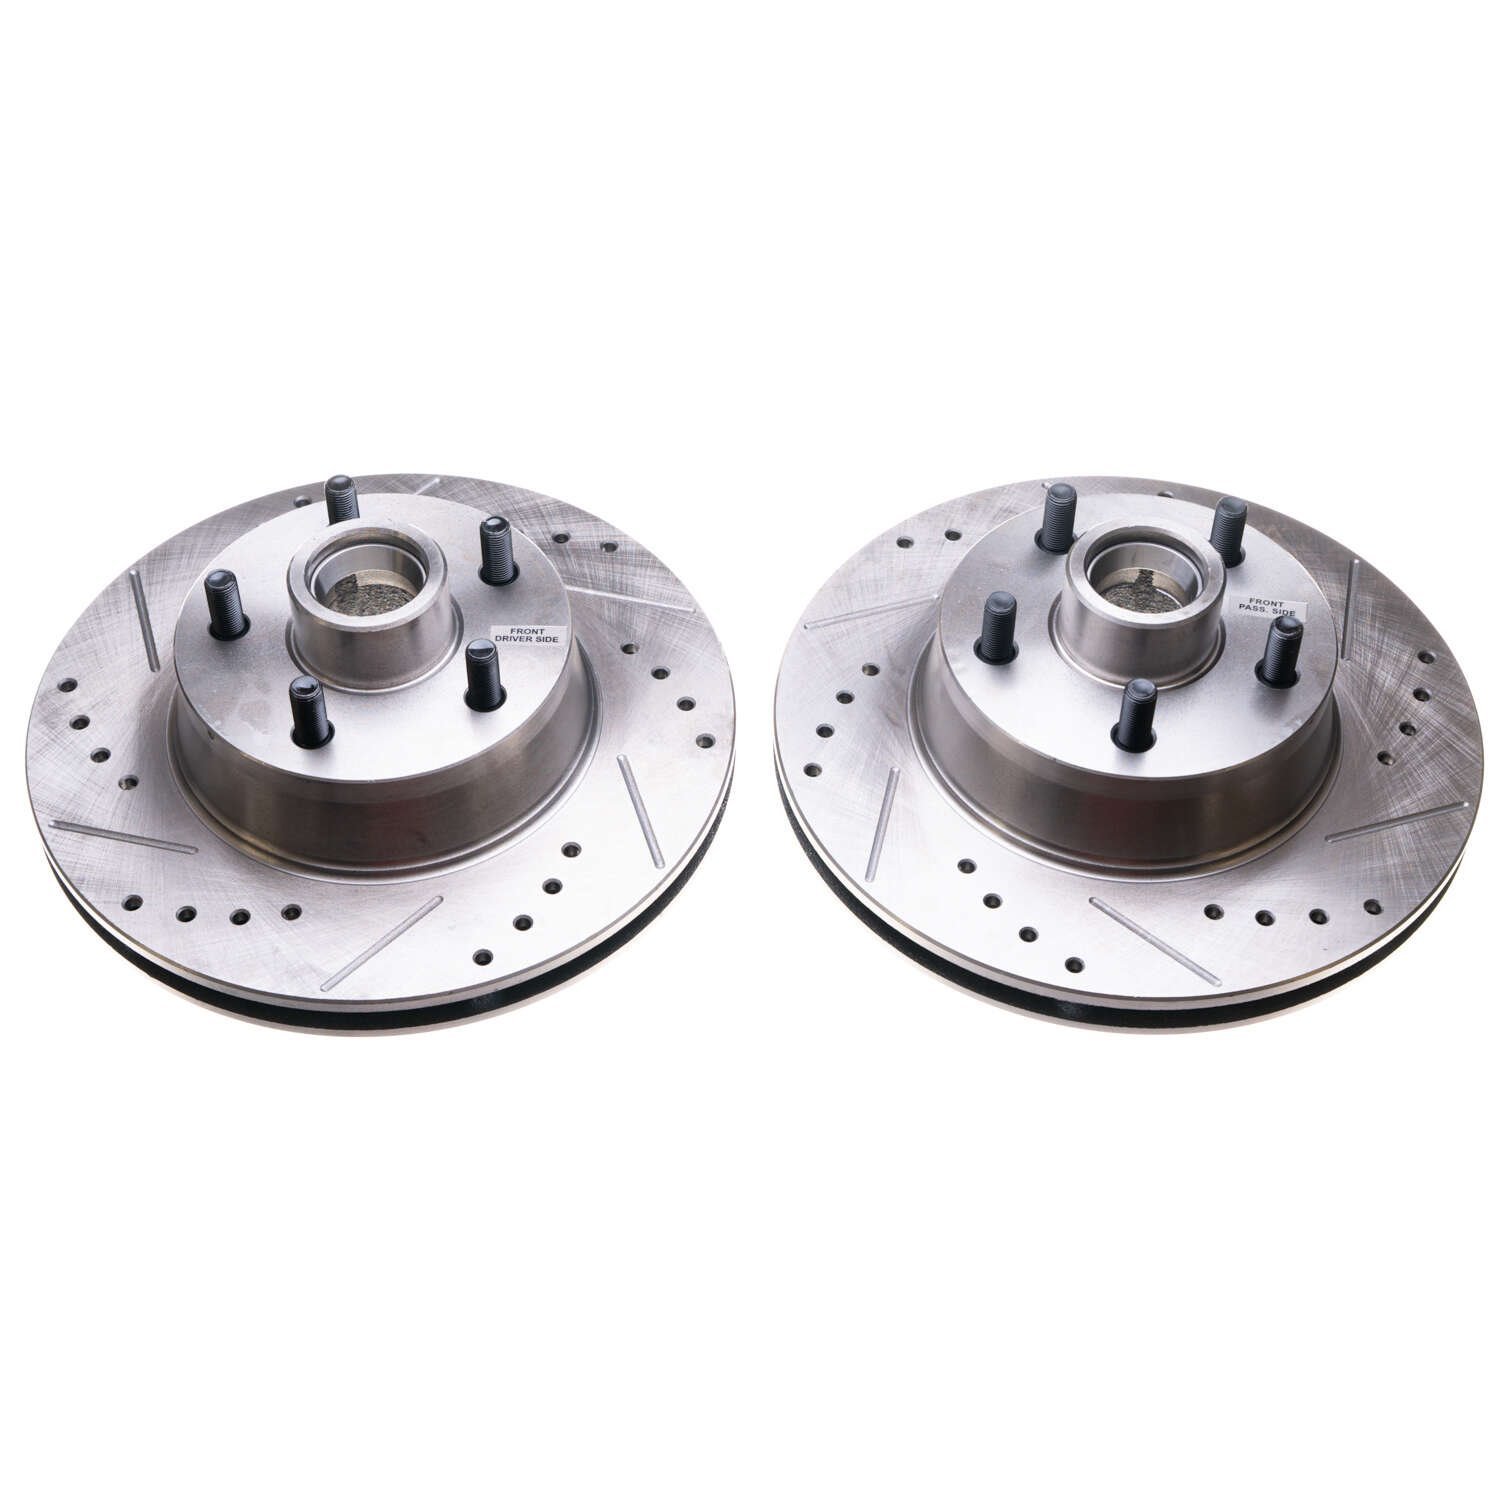 Drilled and Slotted Brake Rotors Fits Select 1968-1973 Ford, Mercury Models [Front]